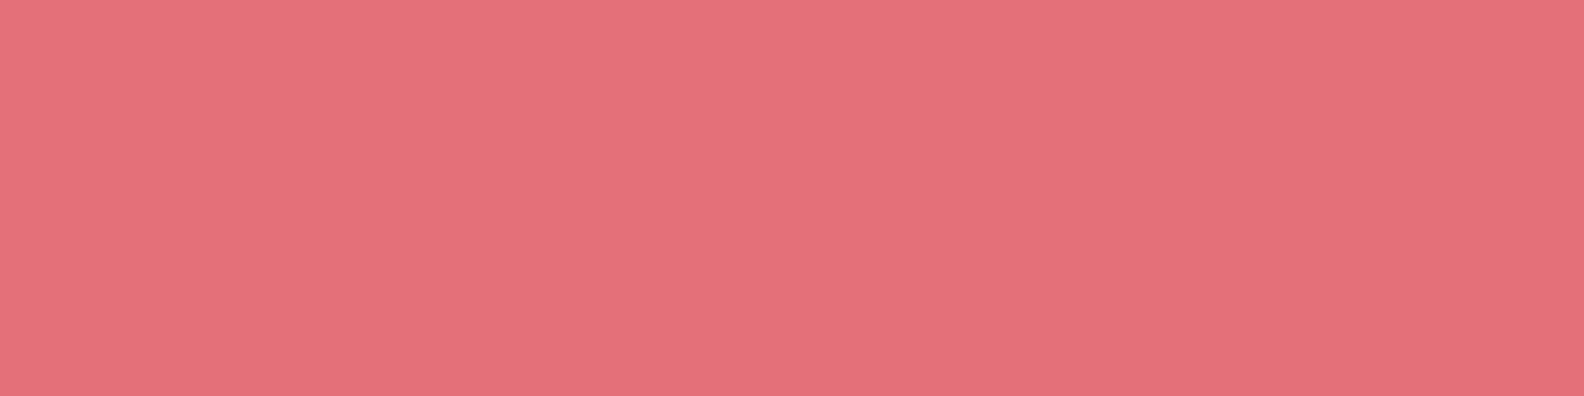 1584x396 Tango Pink Solid Color Background